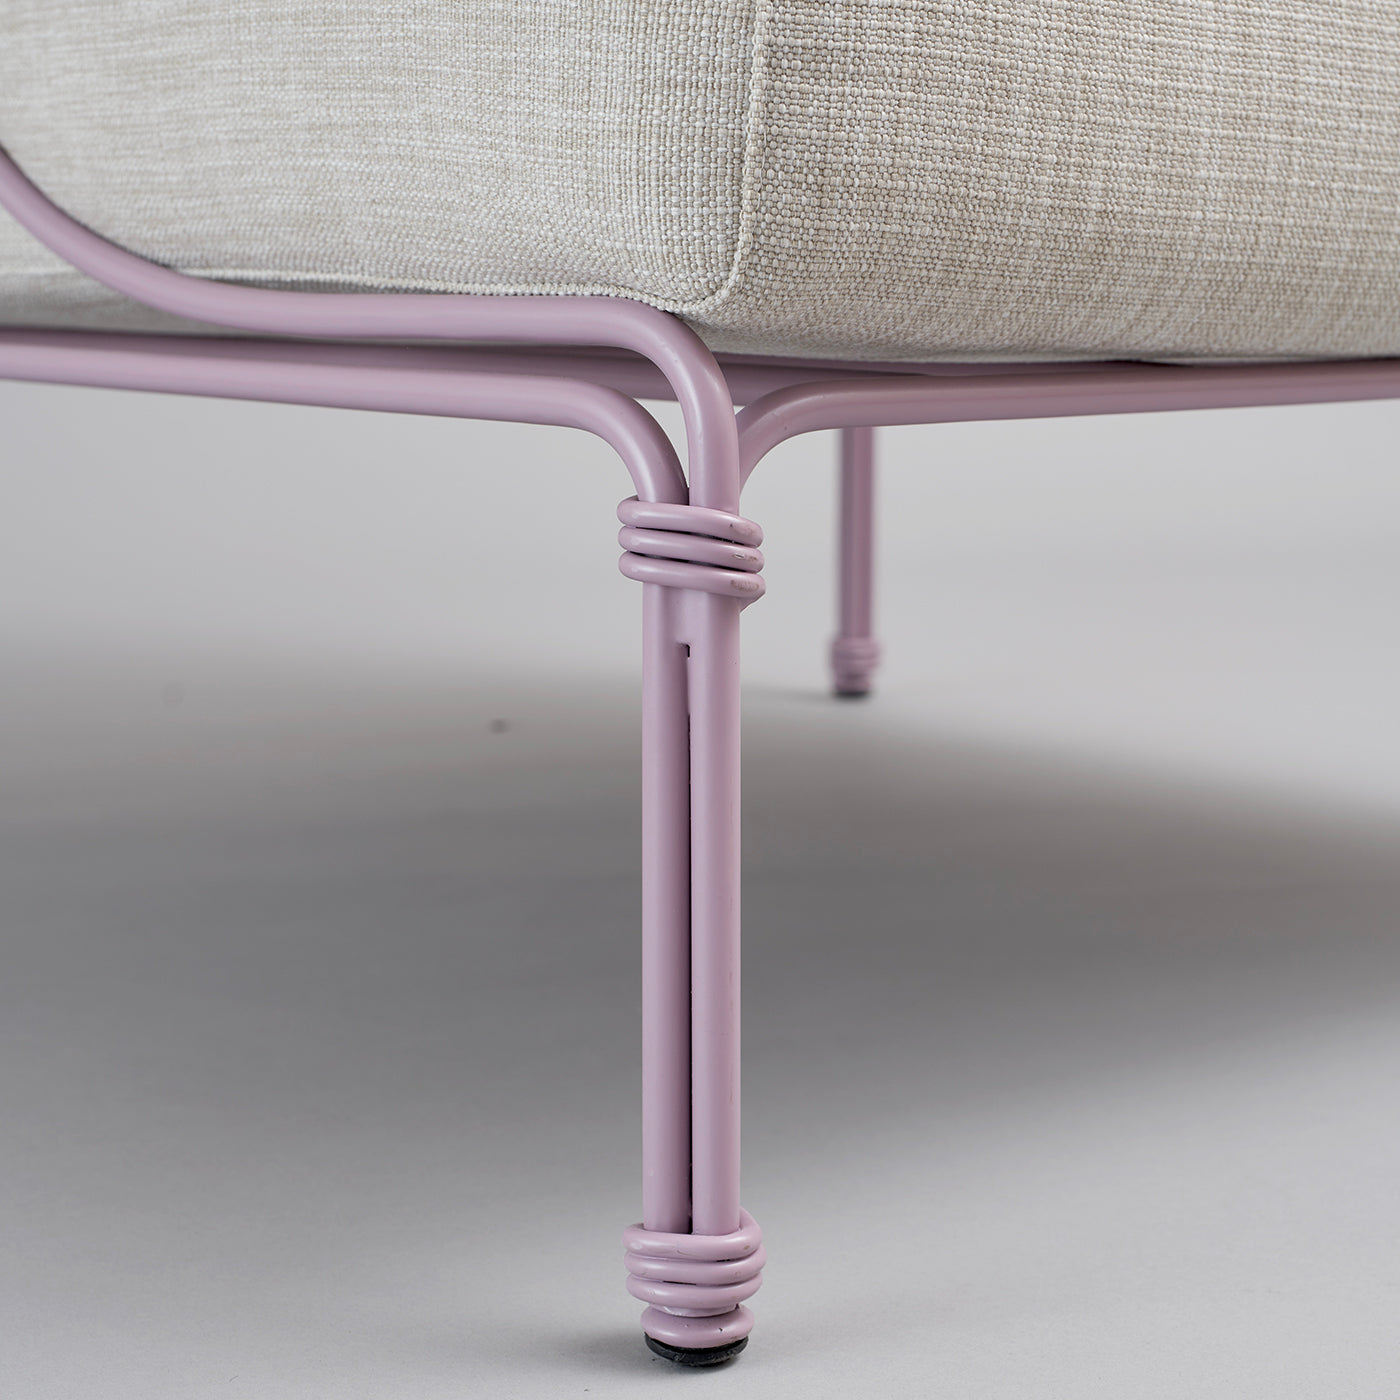 Vitis Lilac and Gray Armchair by Ciarmroli Queda Studio in Stainless Steel - Alternative view 3